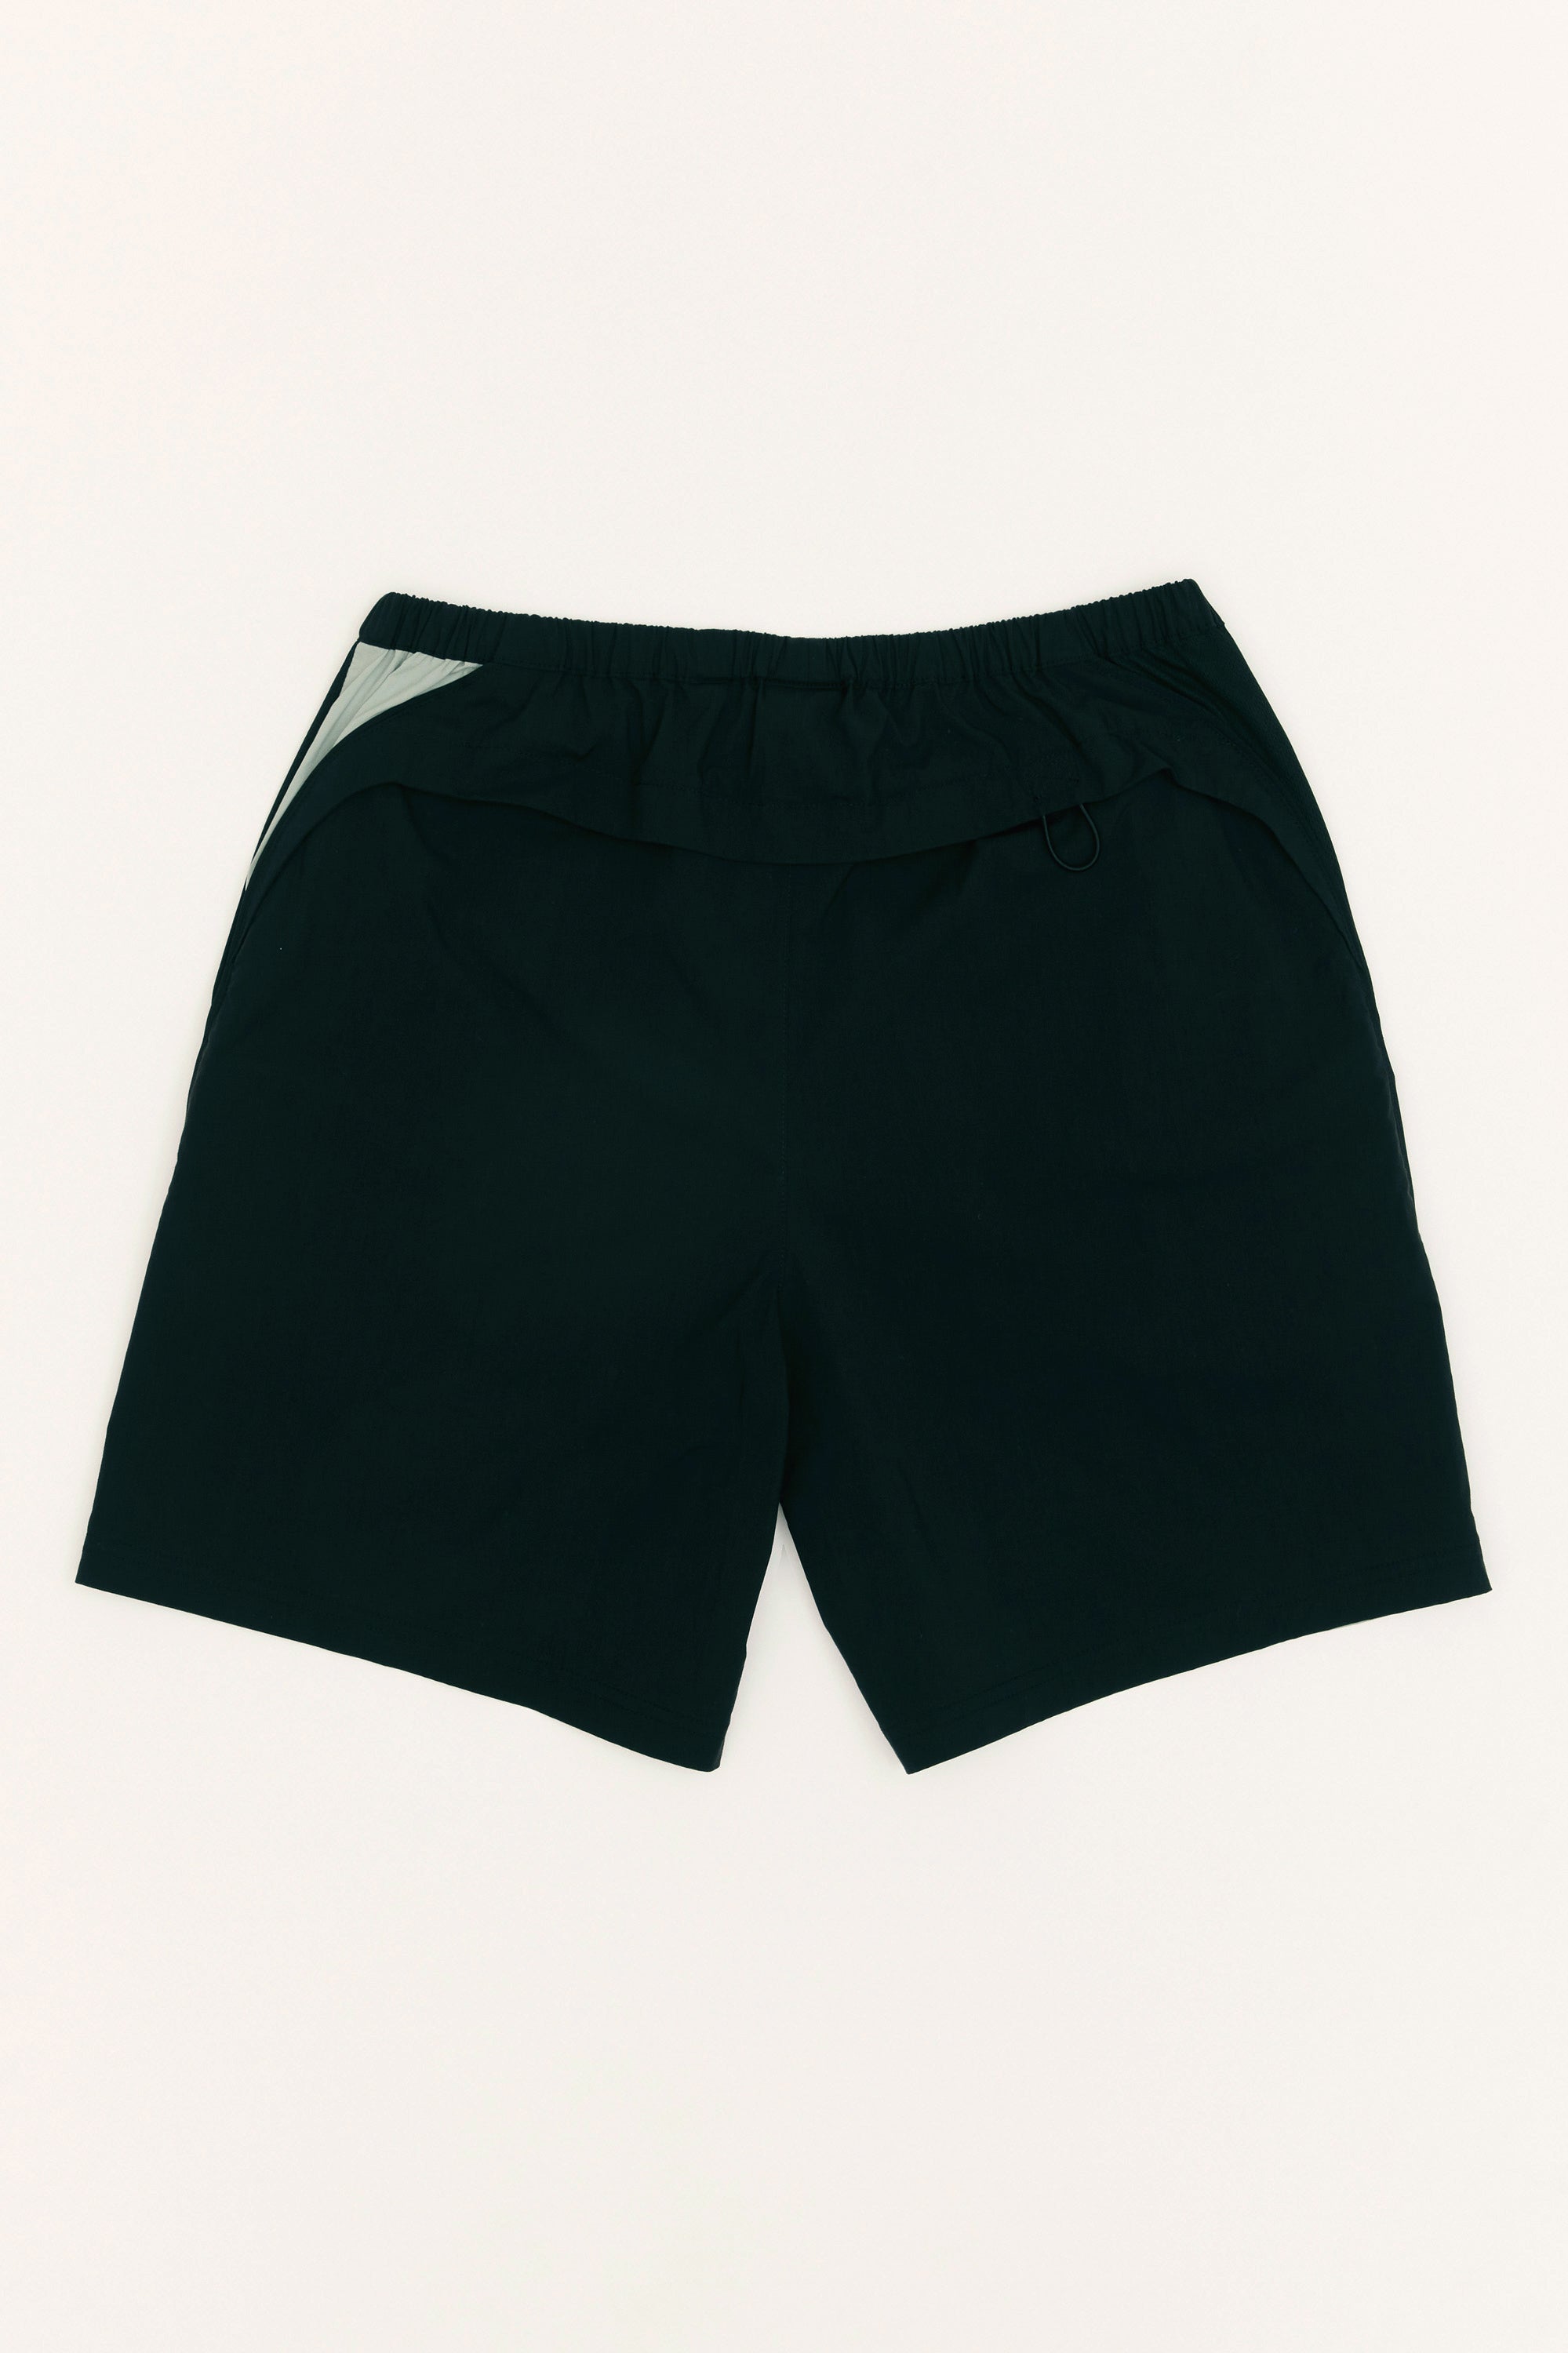 The PANELLED FLIGHT SHORTS  available online with global shipping, and in PAM Stores Melbourne and Sydney.